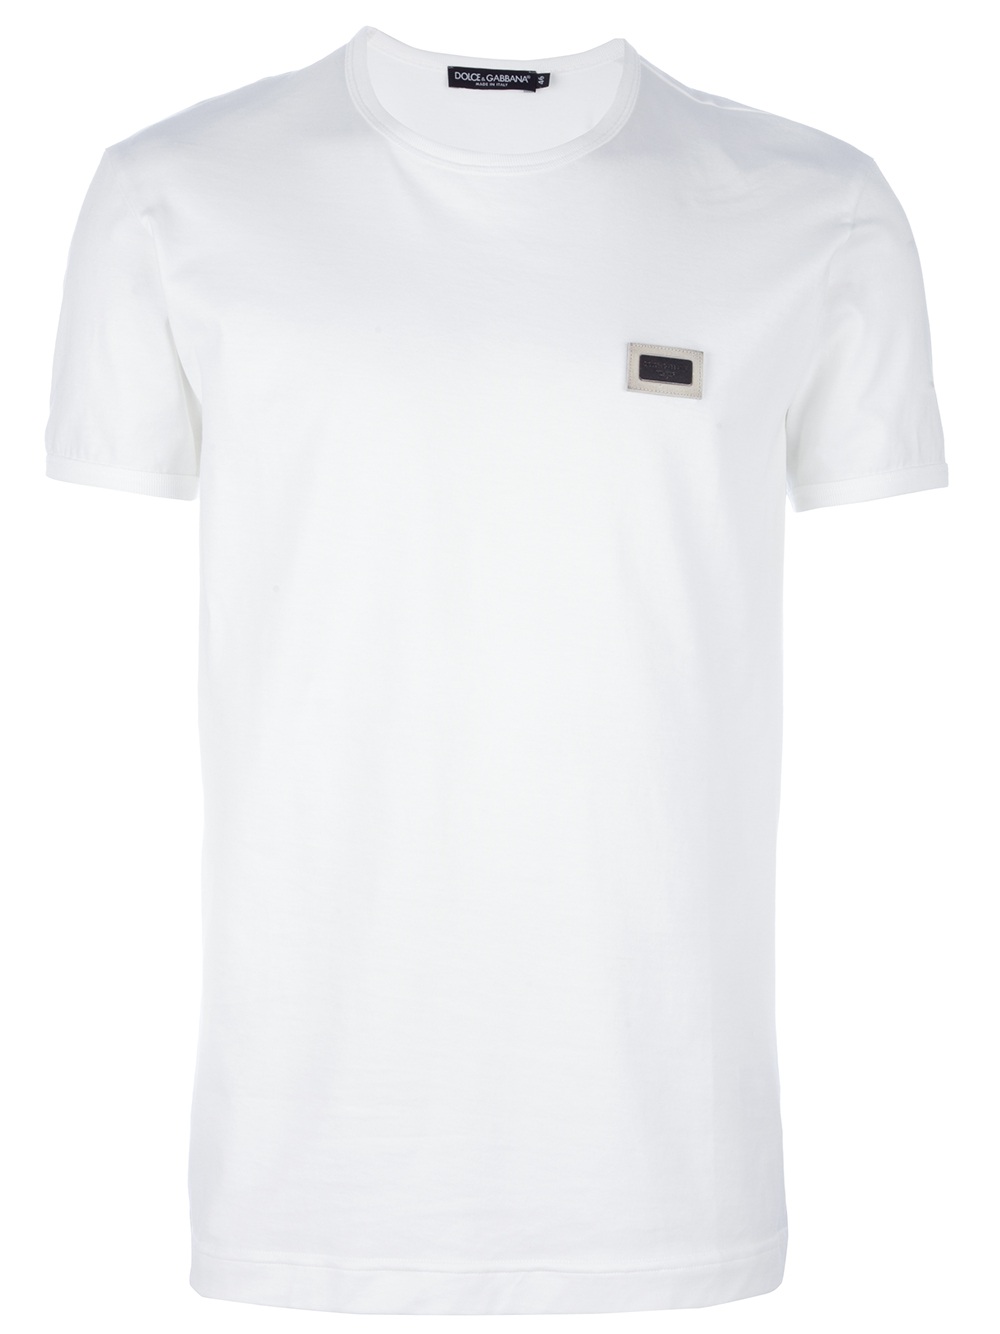 Dolce & Gabbana Logo Patch T-shirt in White for Men - Lyst